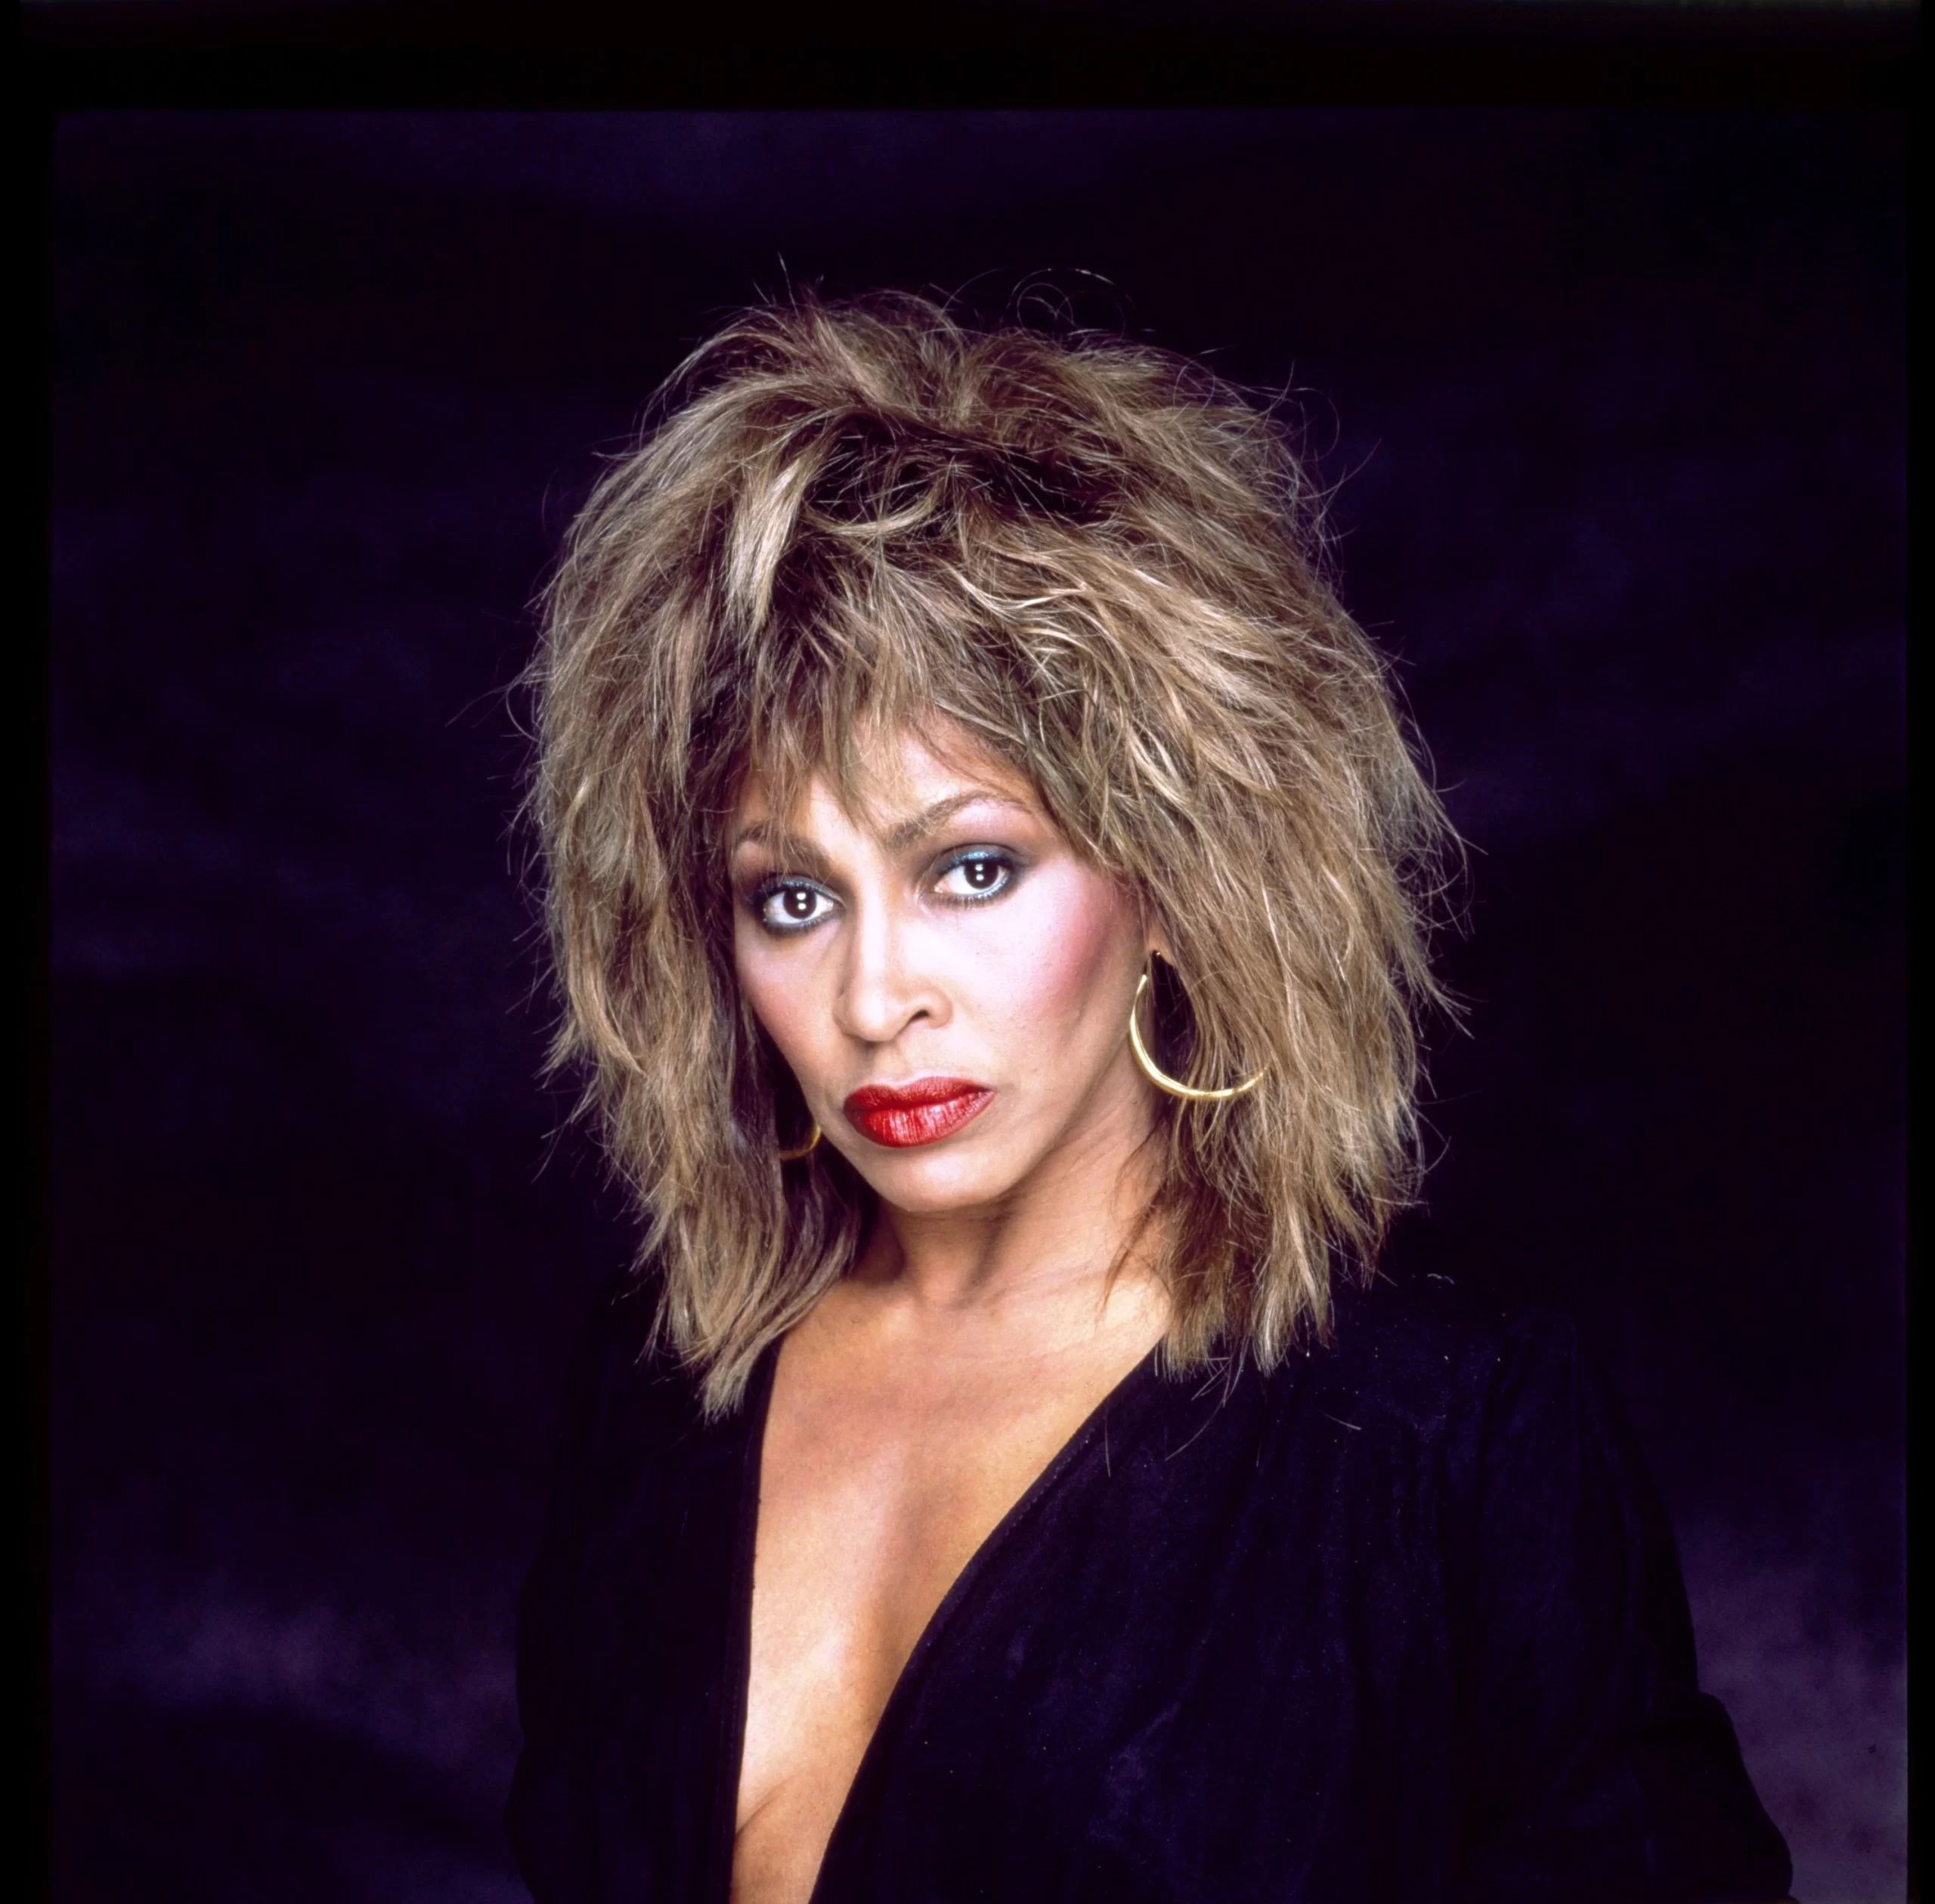 The Passing of a True Legend: The Death of Tina Turner